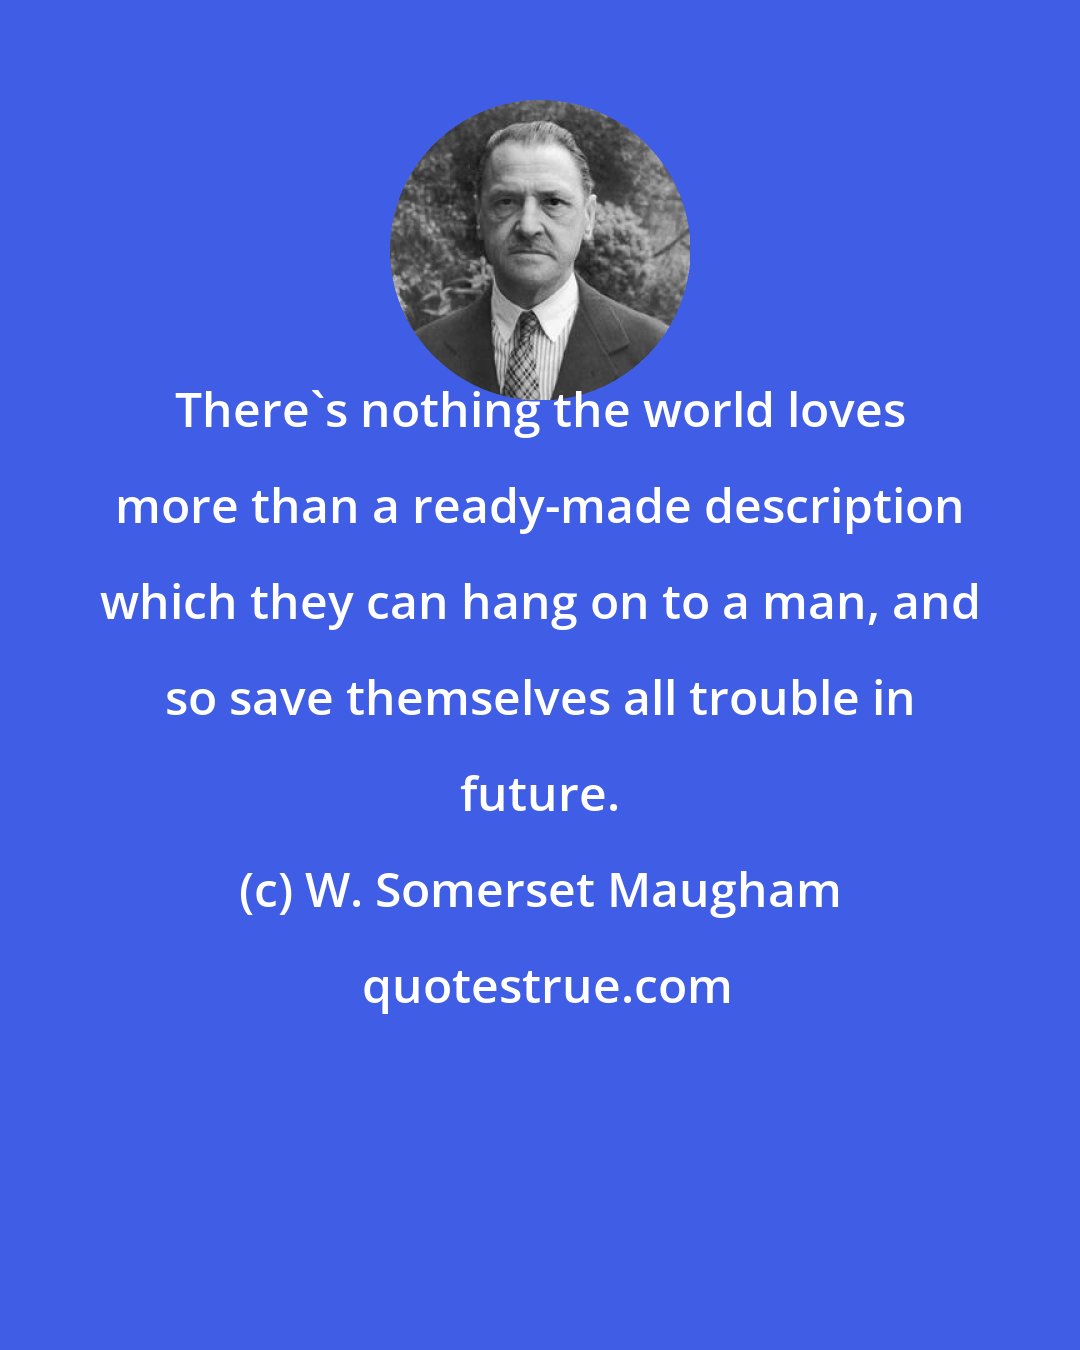 W. Somerset Maugham: There's nothing the world loves more than a ready-made description which they can hang on to a man, and so save themselves all trouble in future.